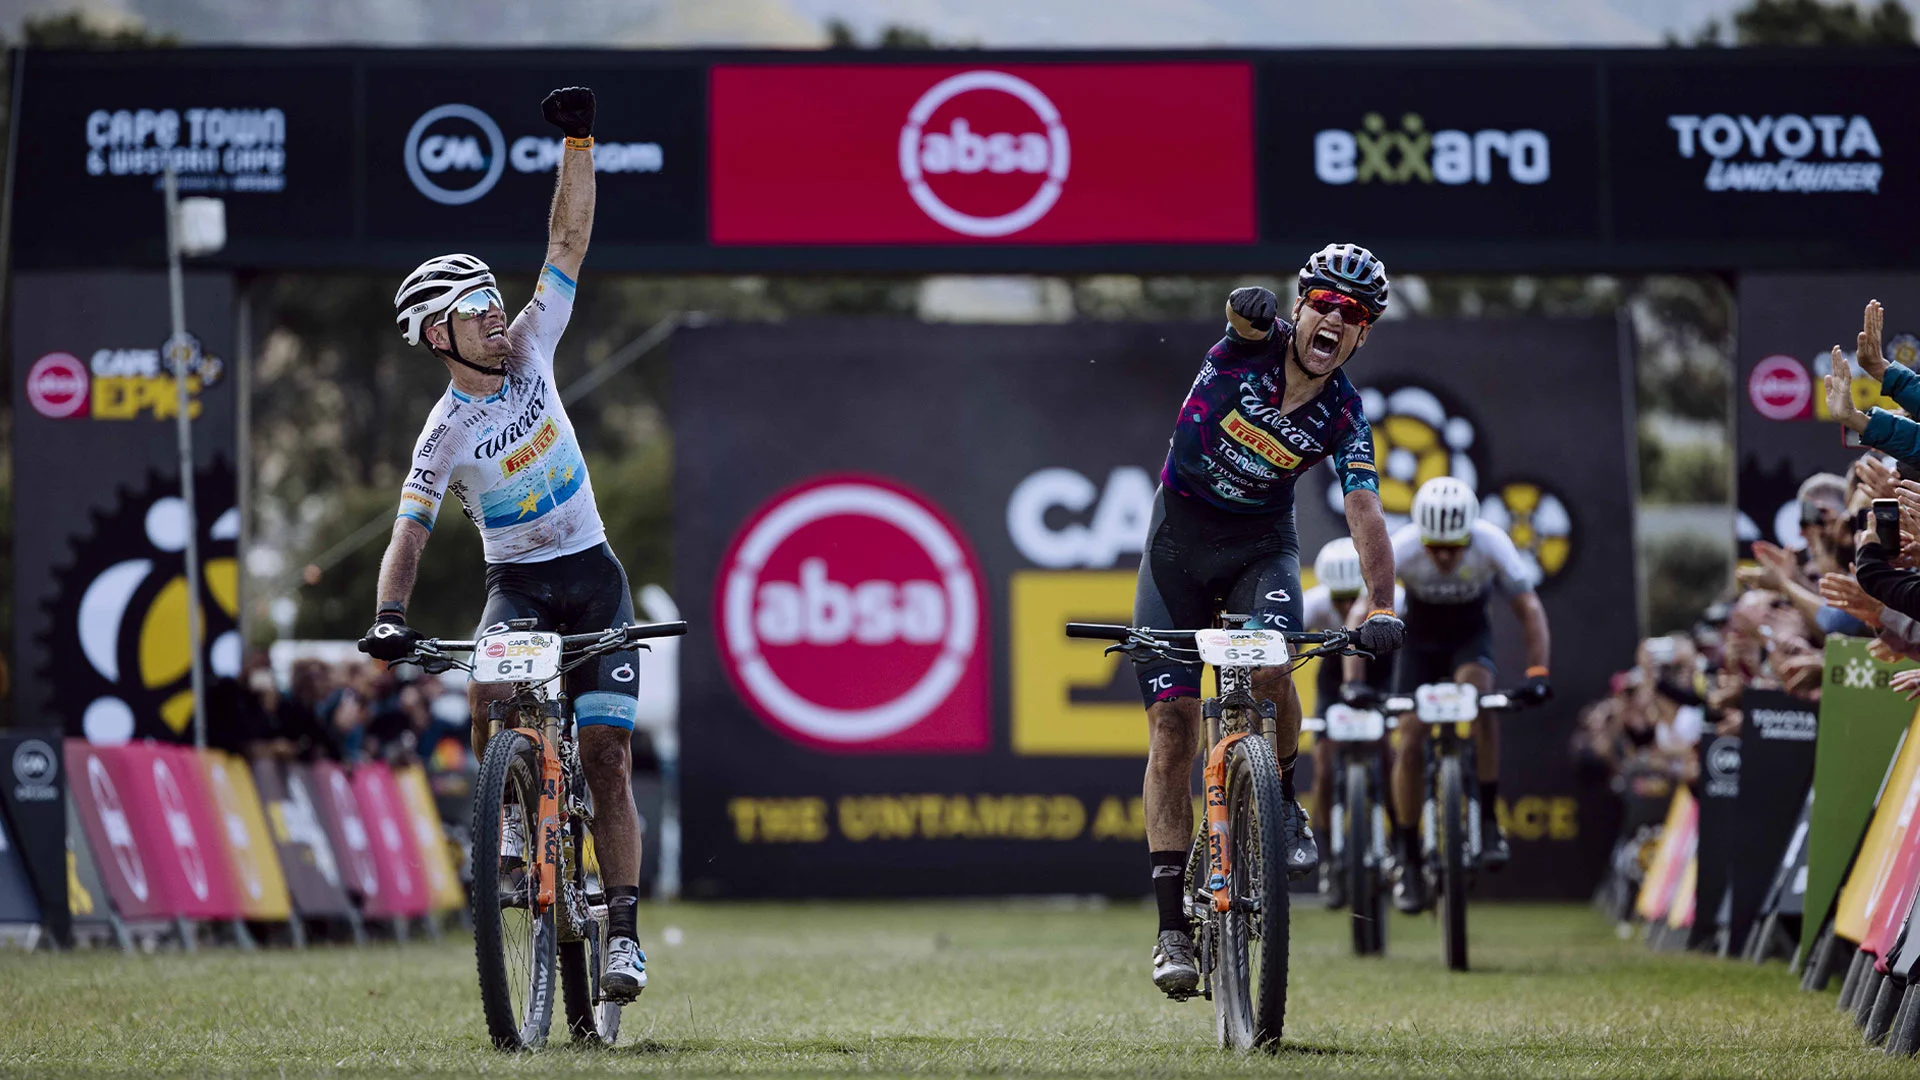 Team Wilier Pirelli's feat at the Absa Cape Epic, the Grande Boucle of MTB